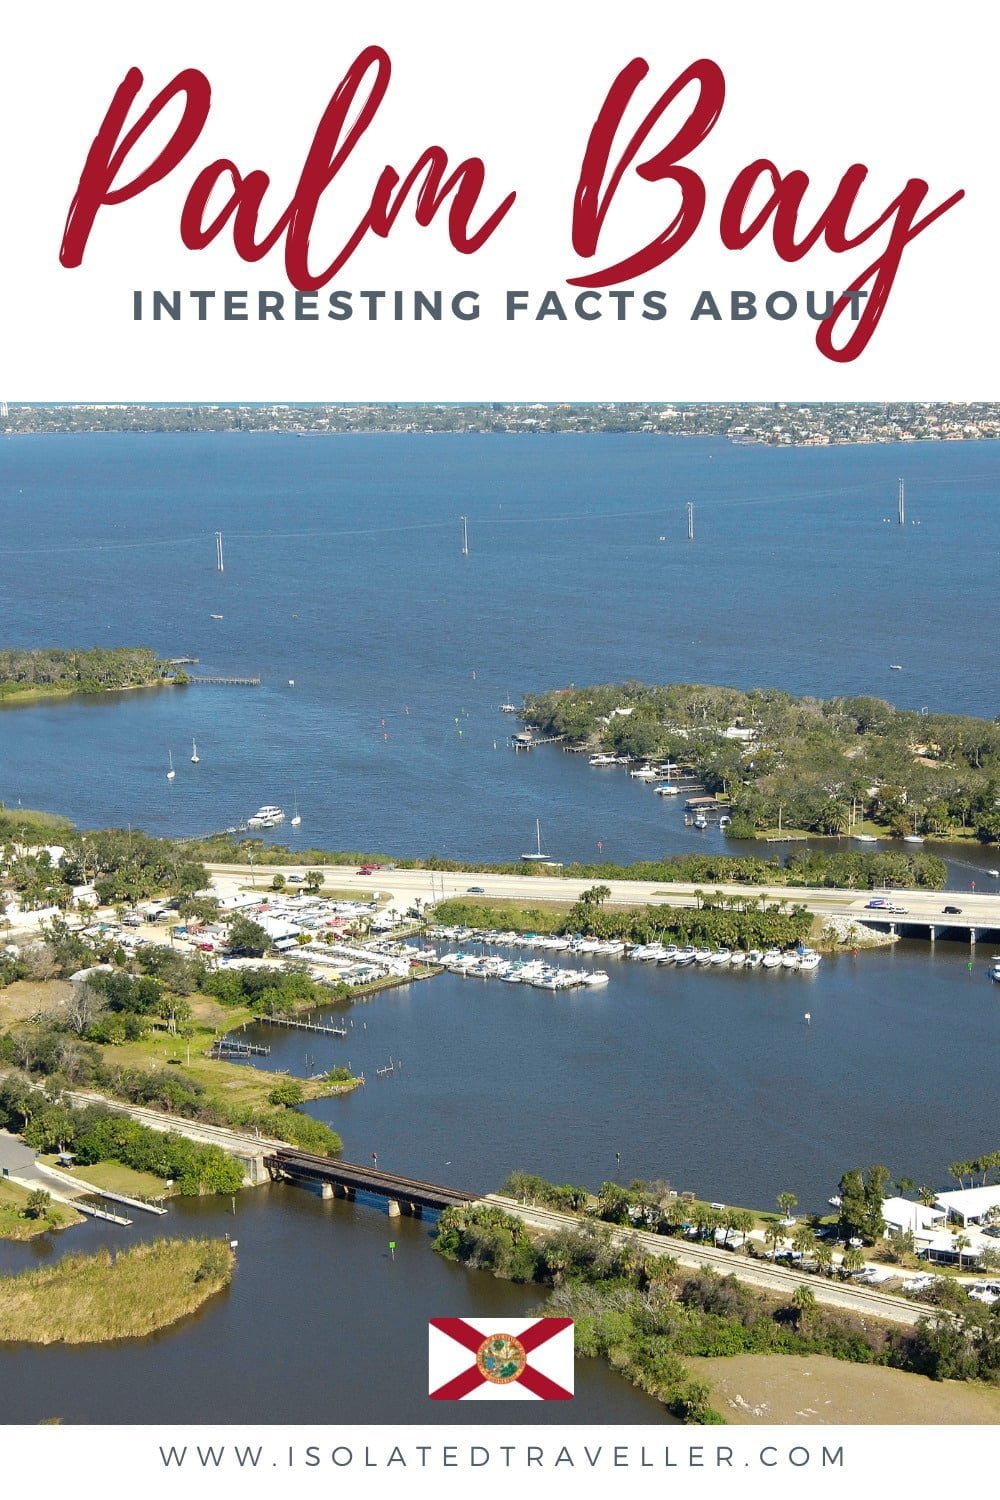 Facts About Palm Bay, Florida